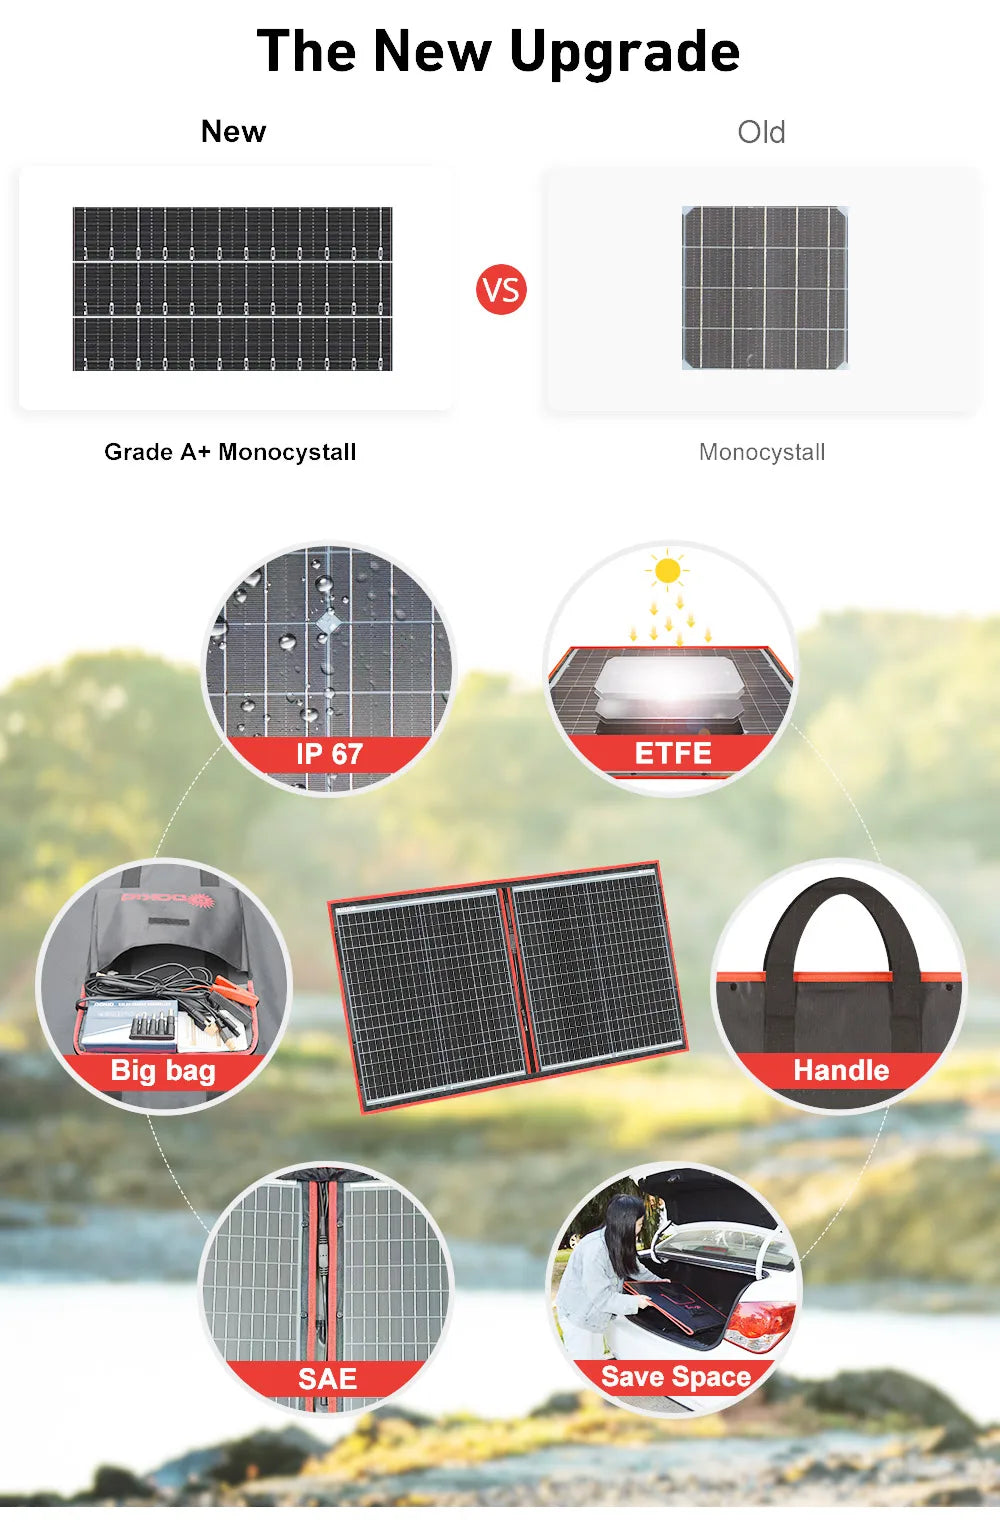 DOKIO 18V 100W 300W Portable Ffolding Solar Panel, Upgraded Dokio 18V solar panel features durable design, waterproof protection, and compact carrying case.